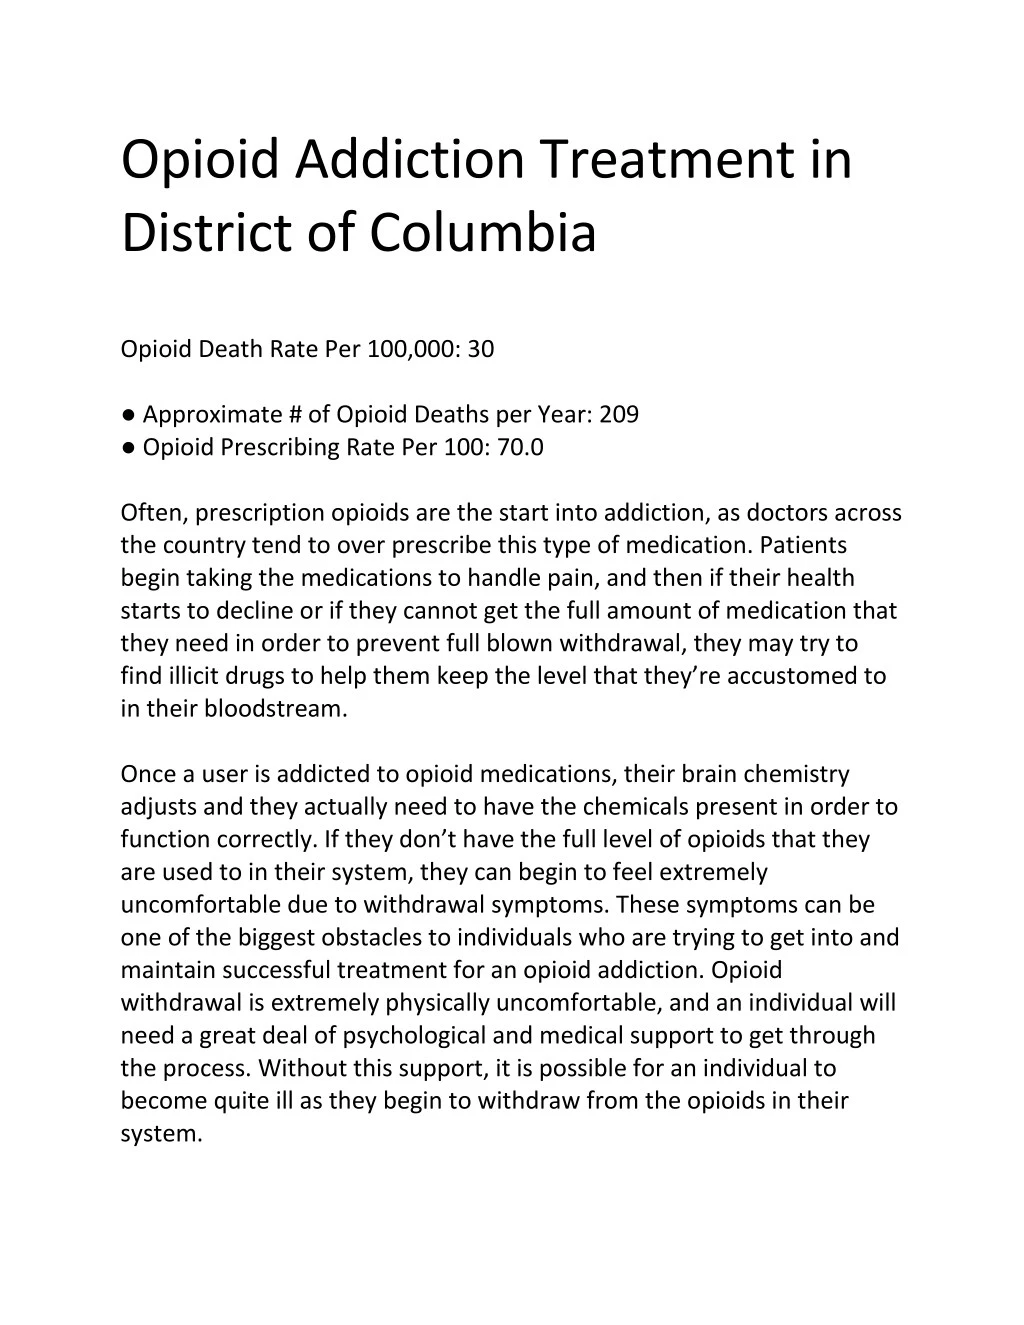 opioid addiction treatment in district